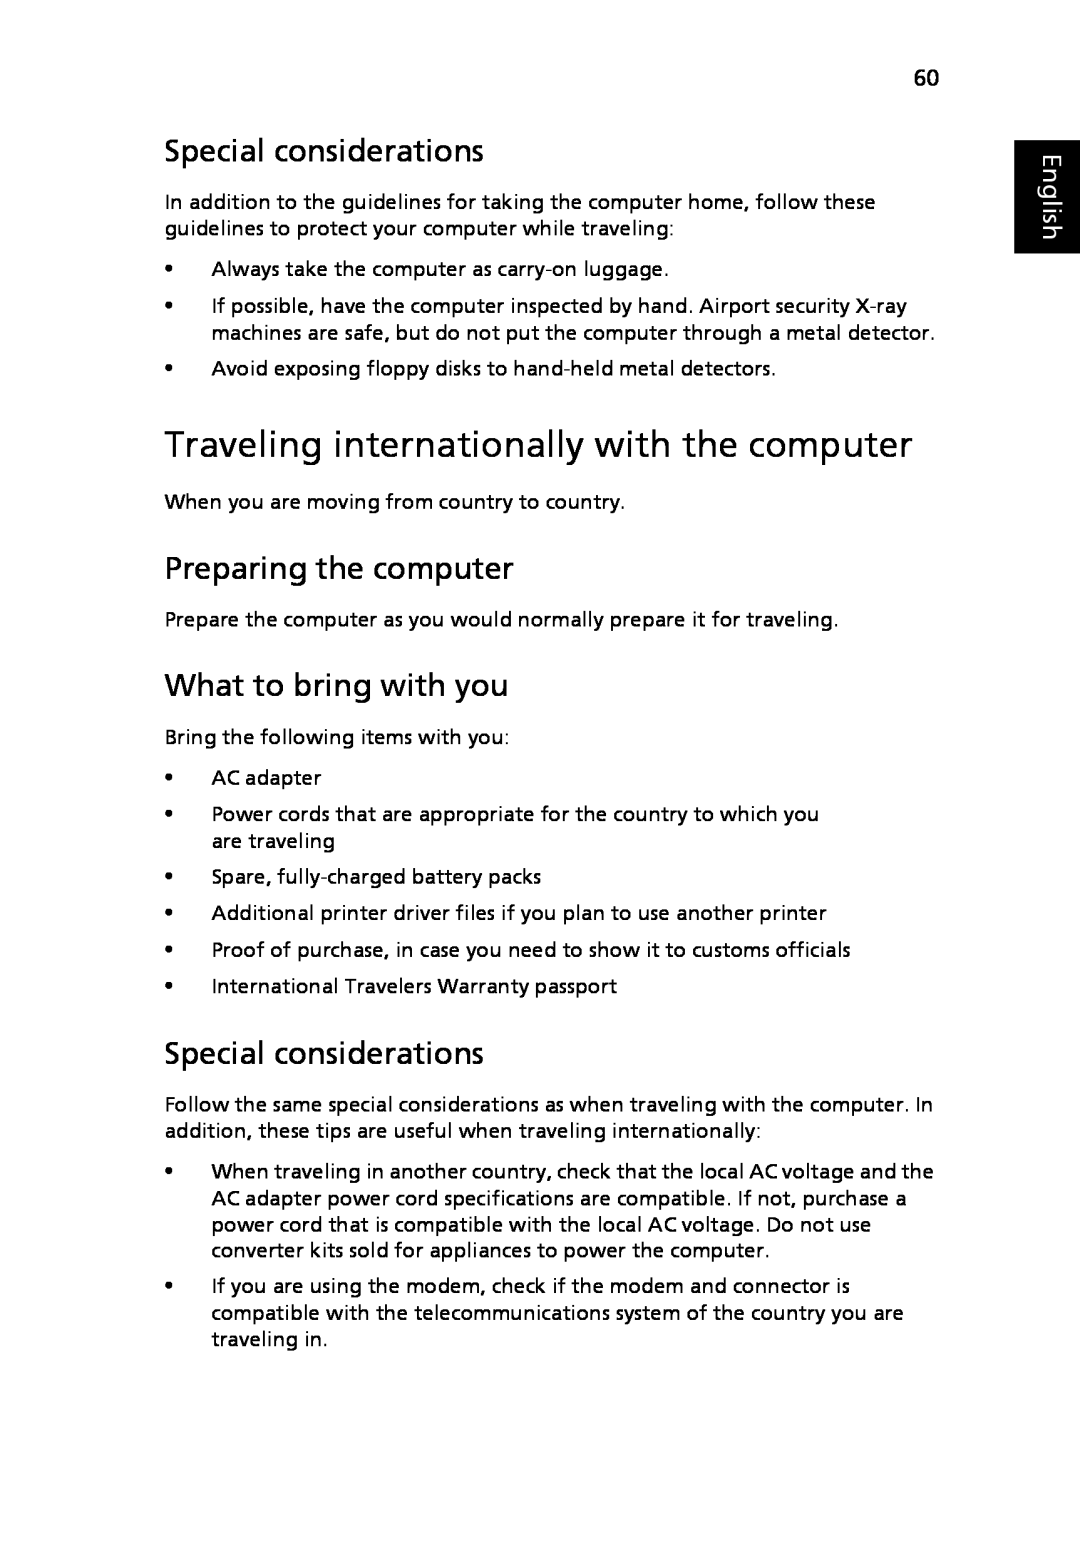 Acer LE1, 8920 Series Traveling internationally with the computer, What to bring with you, Special considerations, English 